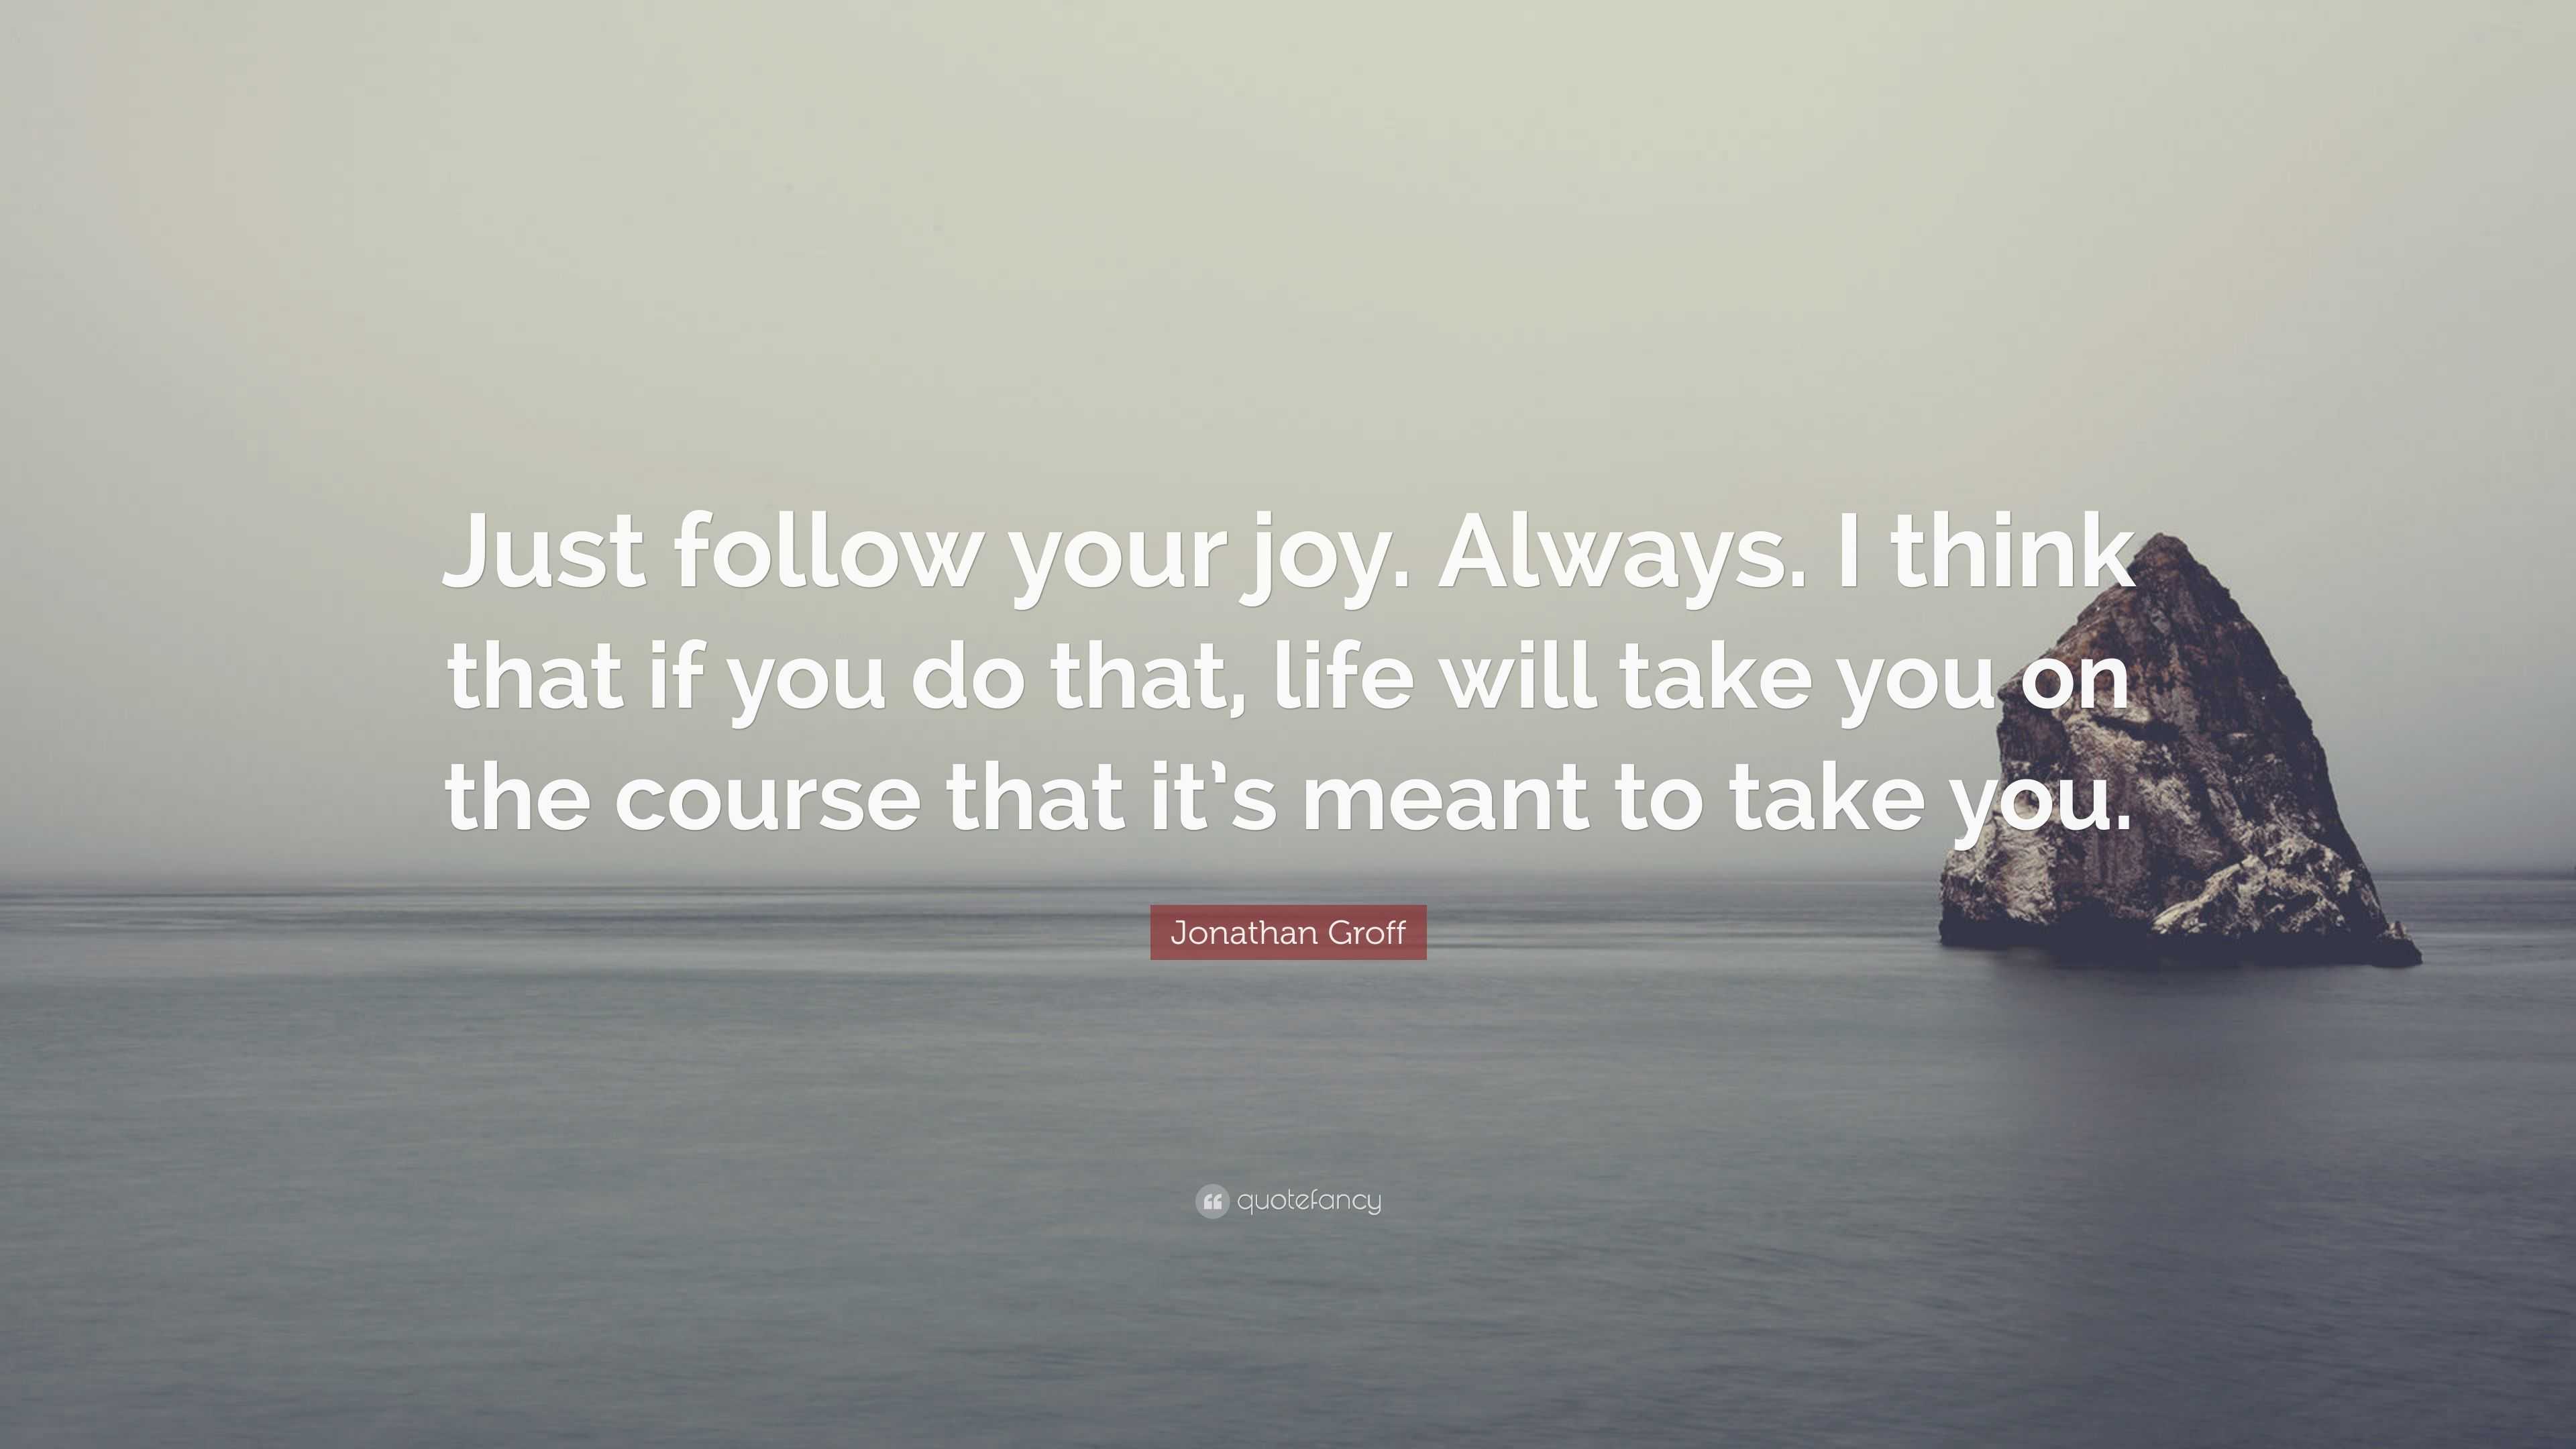 Jonathan Groff Quote: “Just follow your joy. Always. I think that if ...